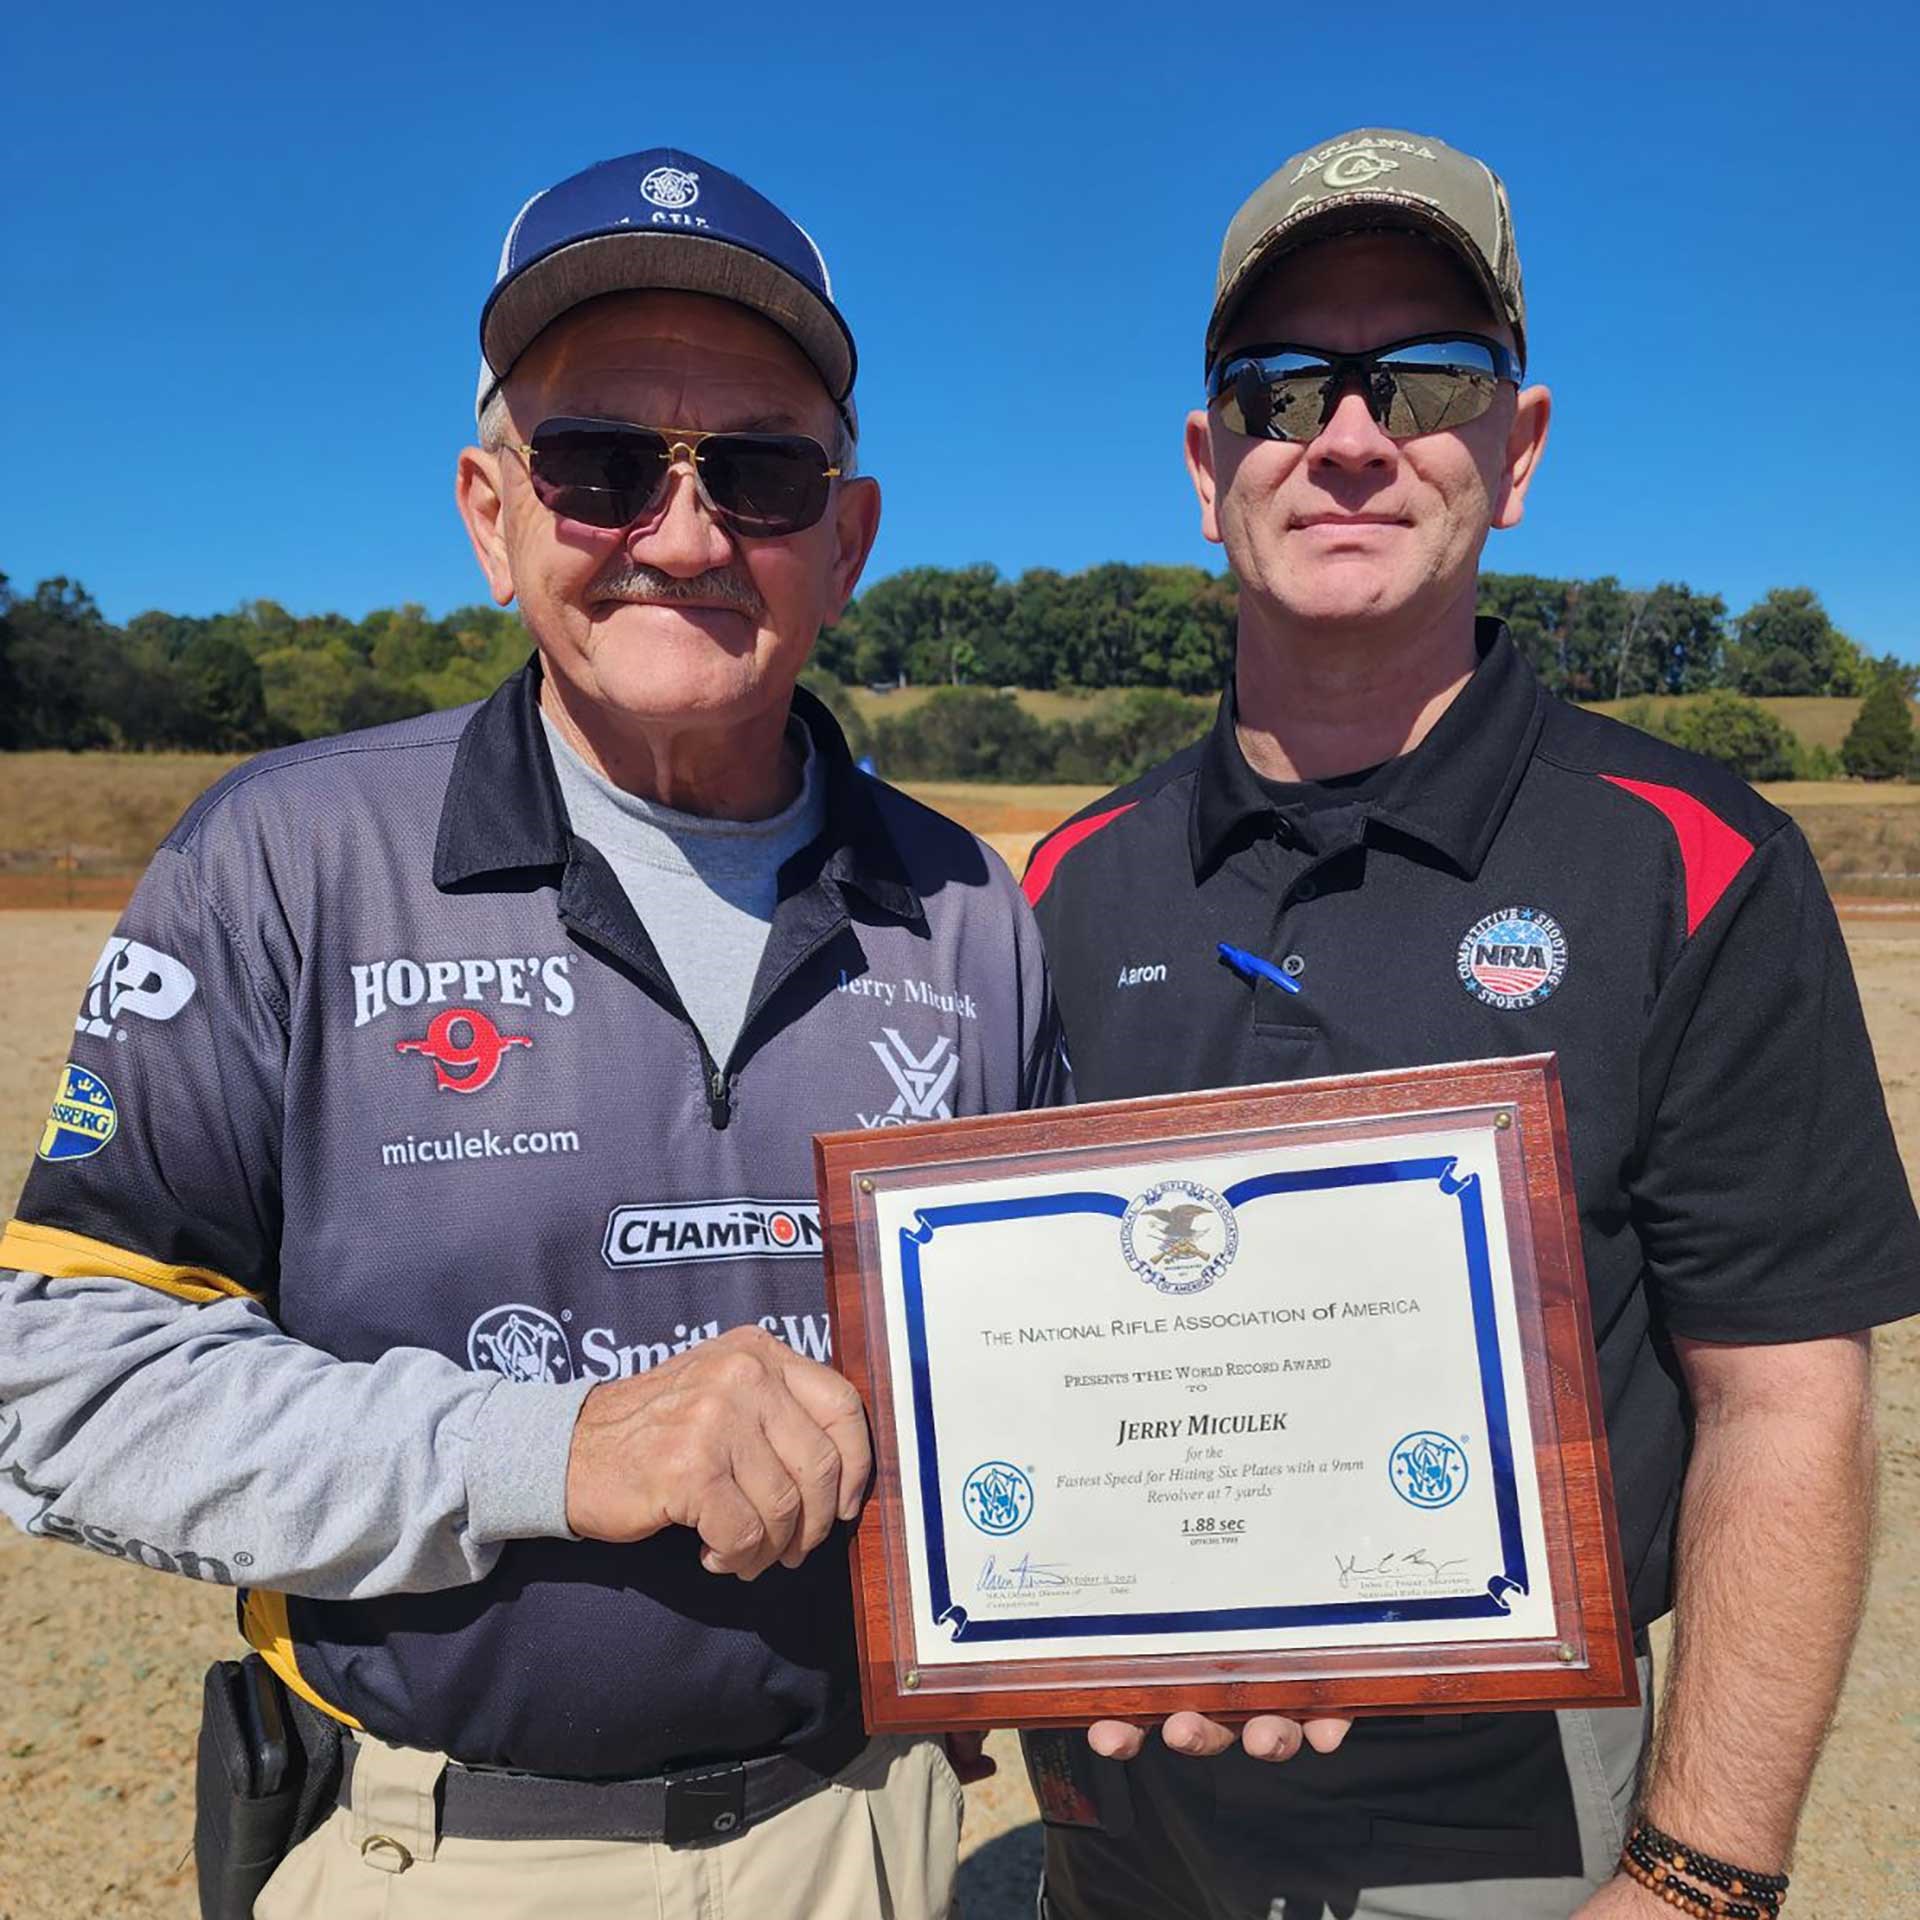 Jerry Miculek and Aaron Farmer stand with Jerry's NRA World Record plaque.